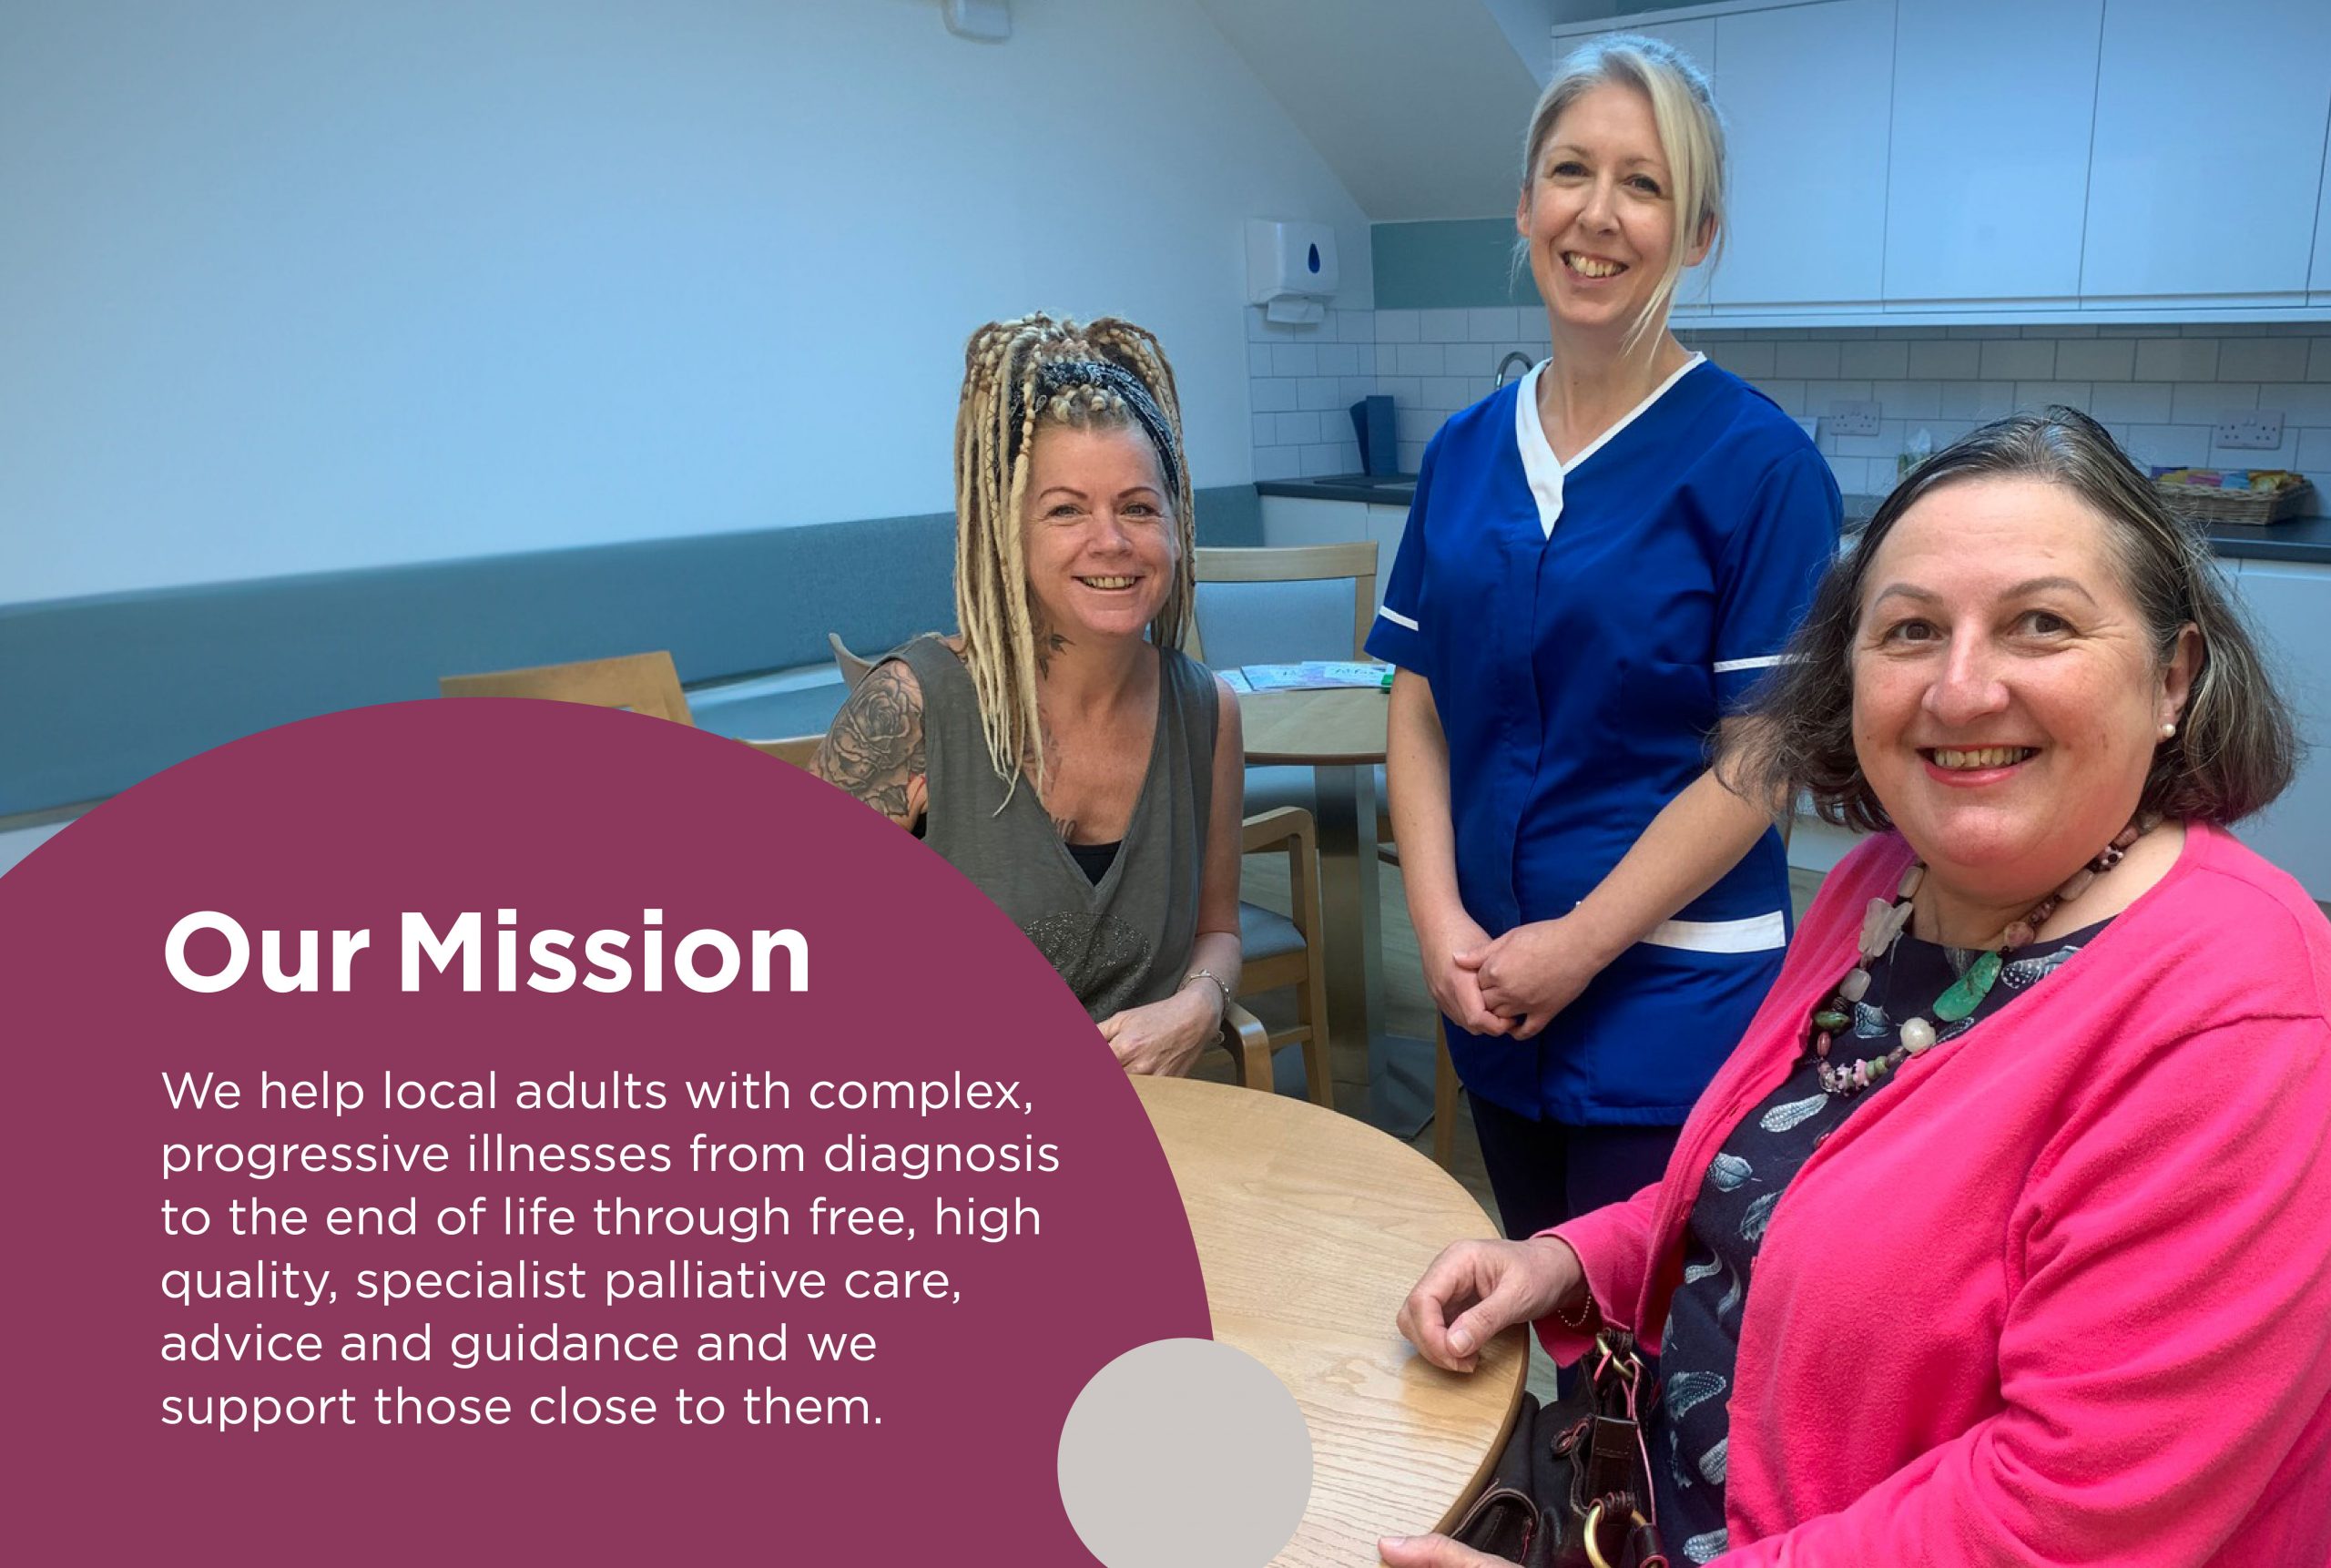 A photo of 2 patients smiling with one of the hospice nurses at a Coffee Morning. It includes the text: 'Our Mission. We help local adults with complex, progressive illnesses from diagnosis to the end of life. Through free, high quality, specialist palliative care, advice and guidance. And we support those close to them.'